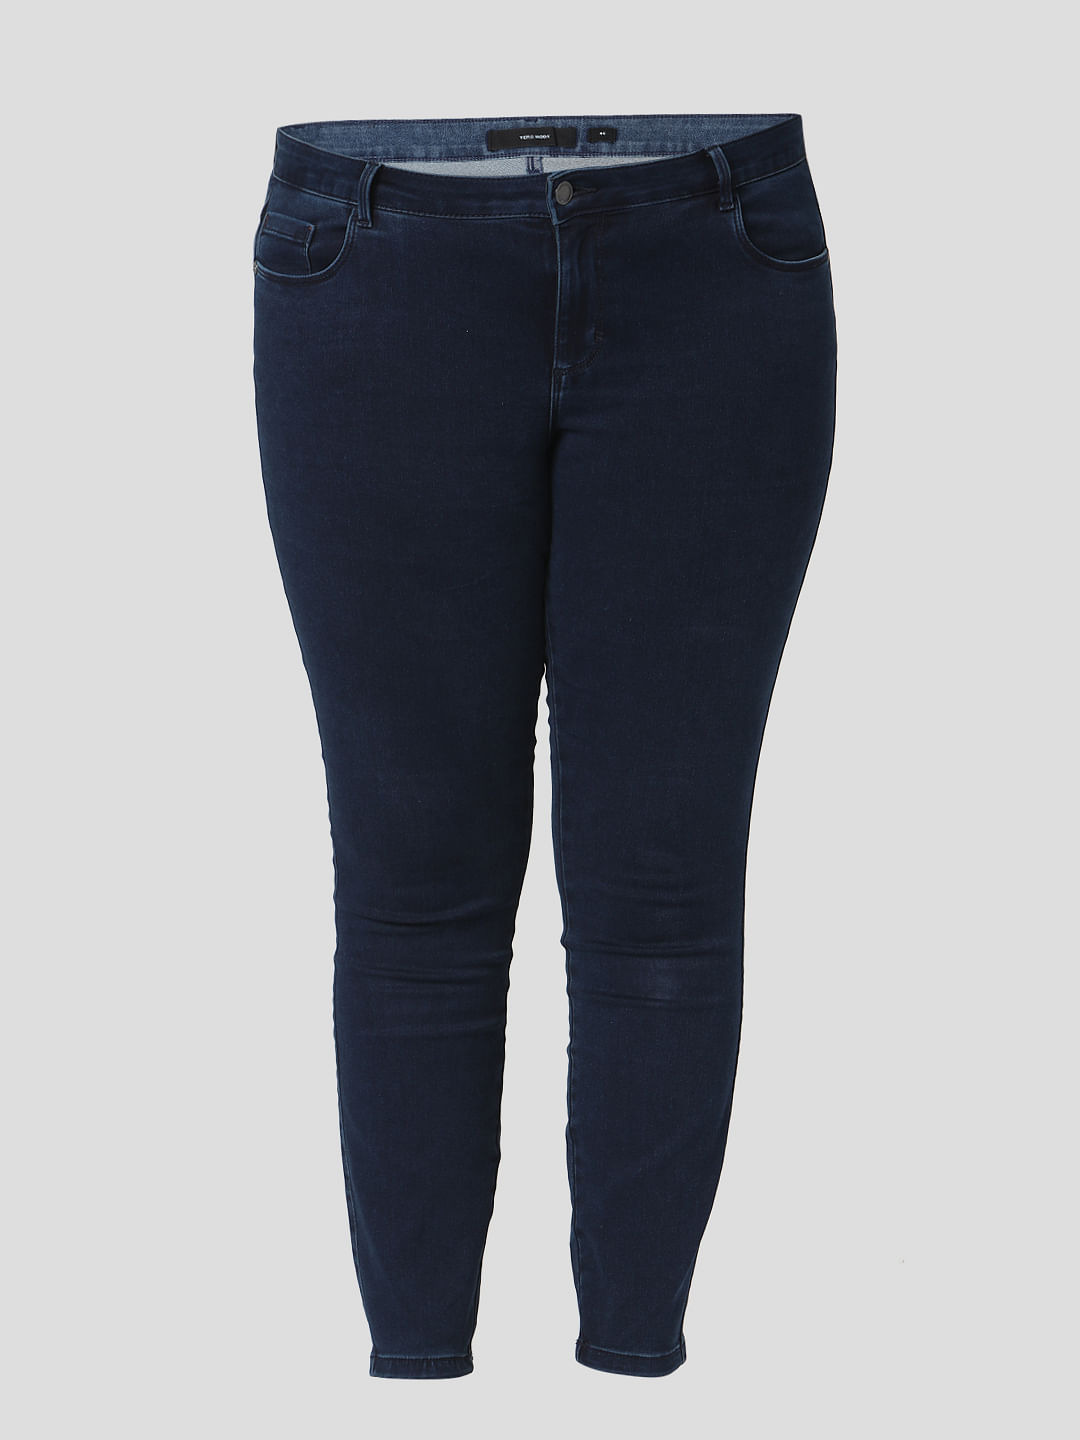 Buy LIFE Mid Stone High Rise Denim Relaxed Women's Jeans | Shoppers Stop